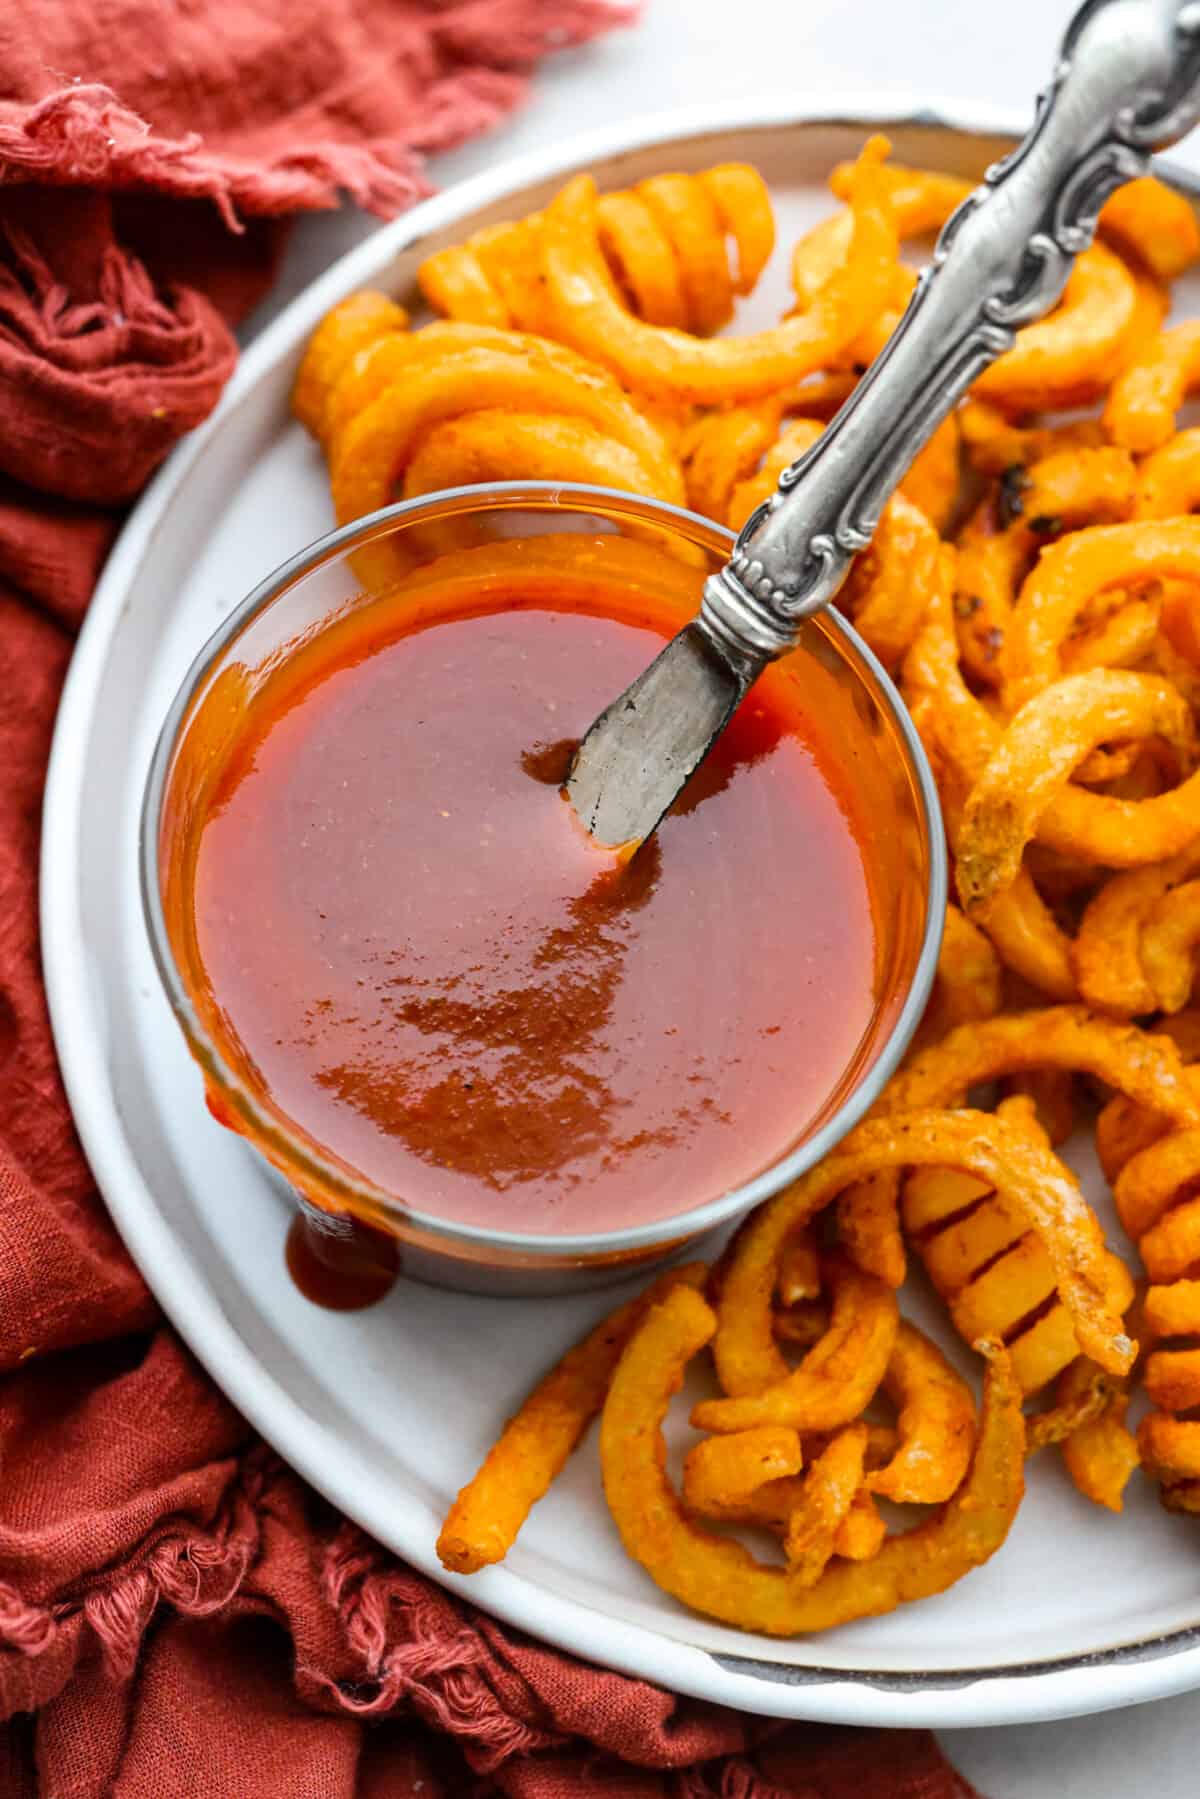 Curly fries served with Arby’s sauce in a small glass bowl.